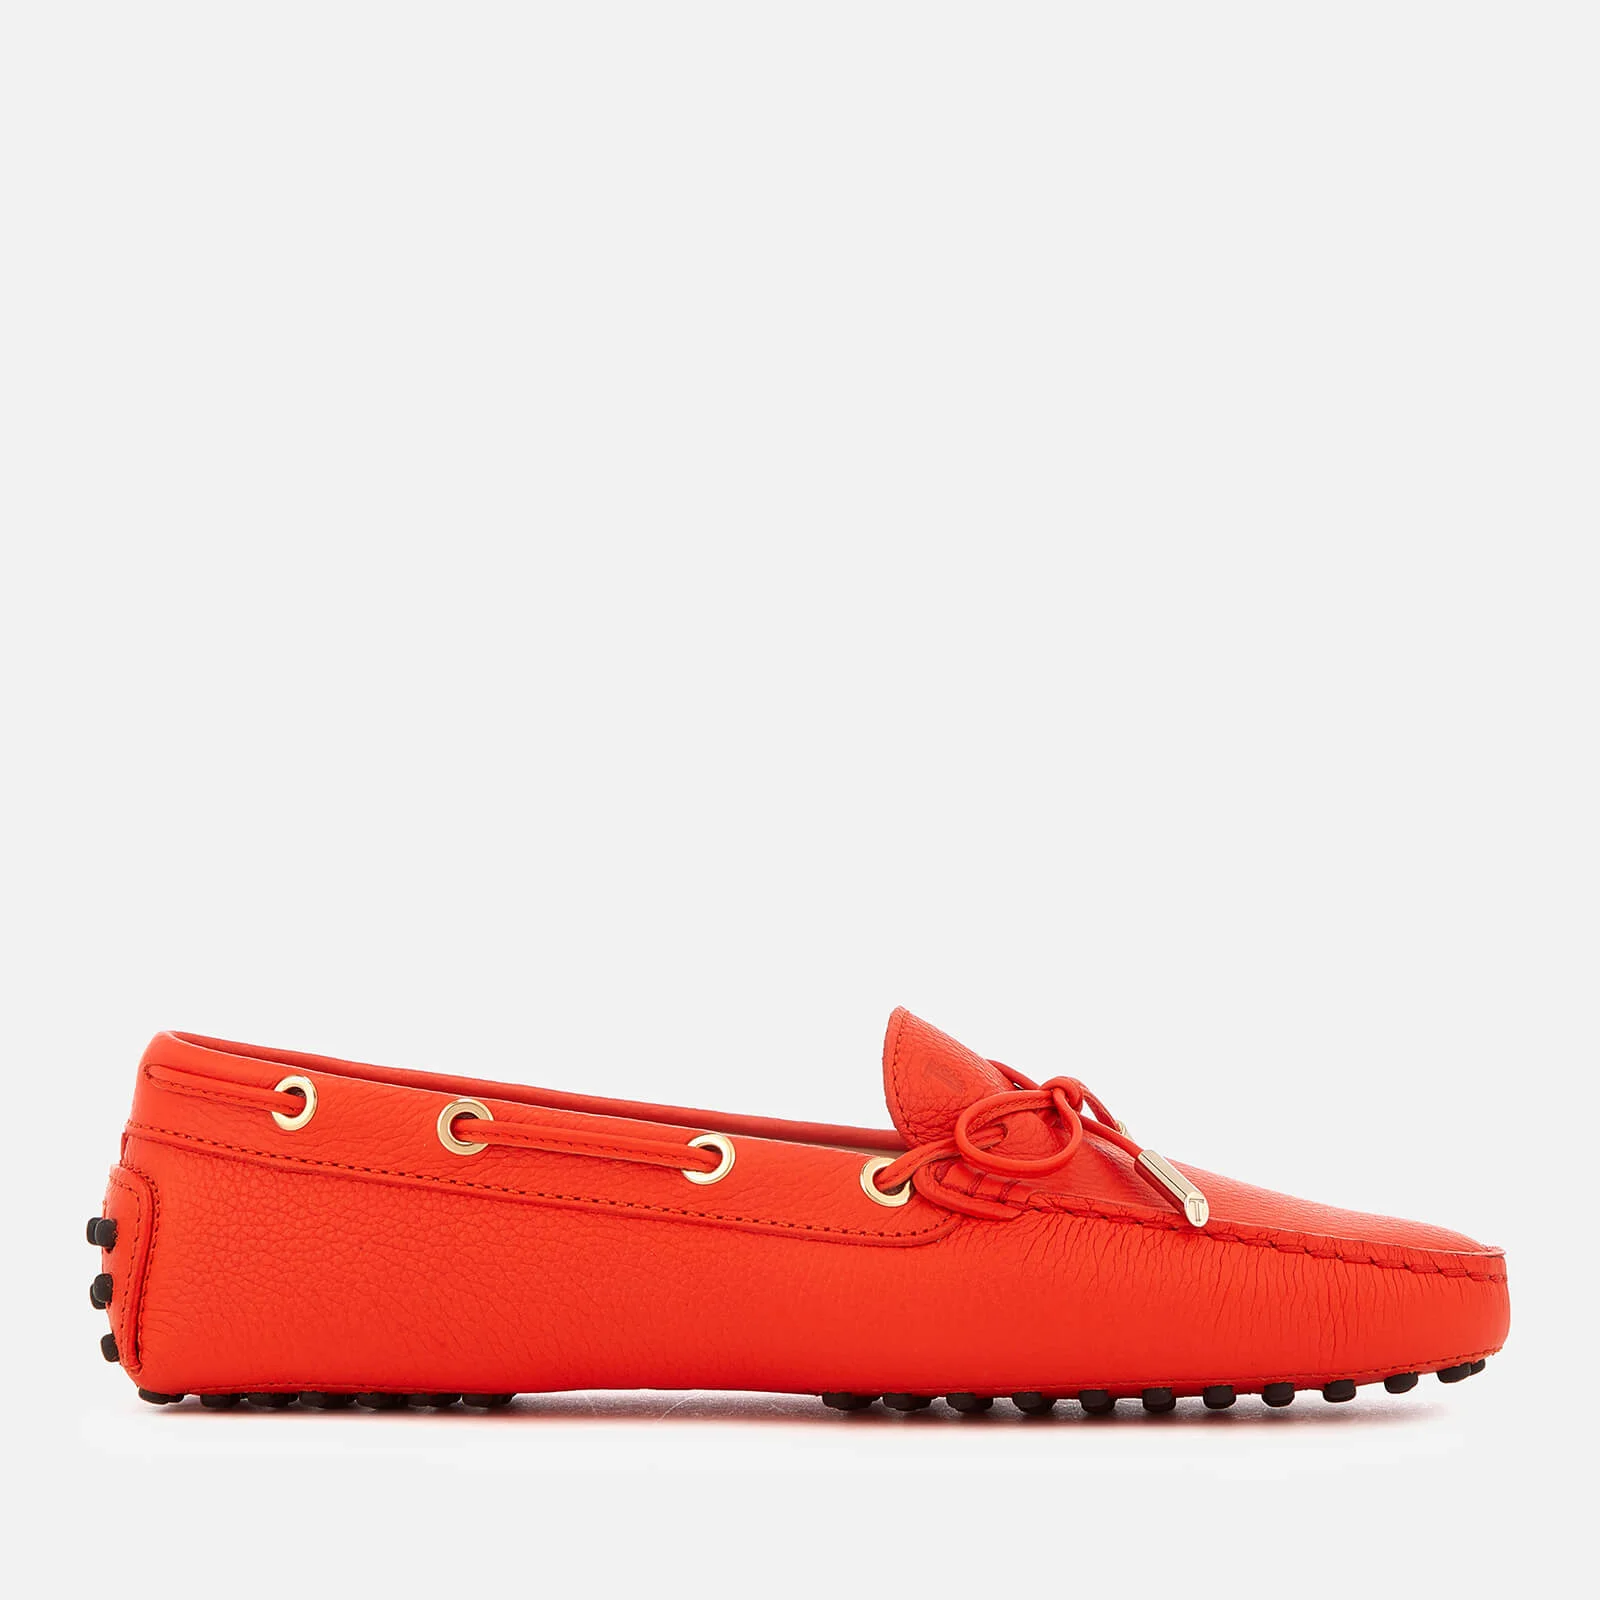 Tod's Women's Gommino Leather Driving Shoes - Orange Image 1